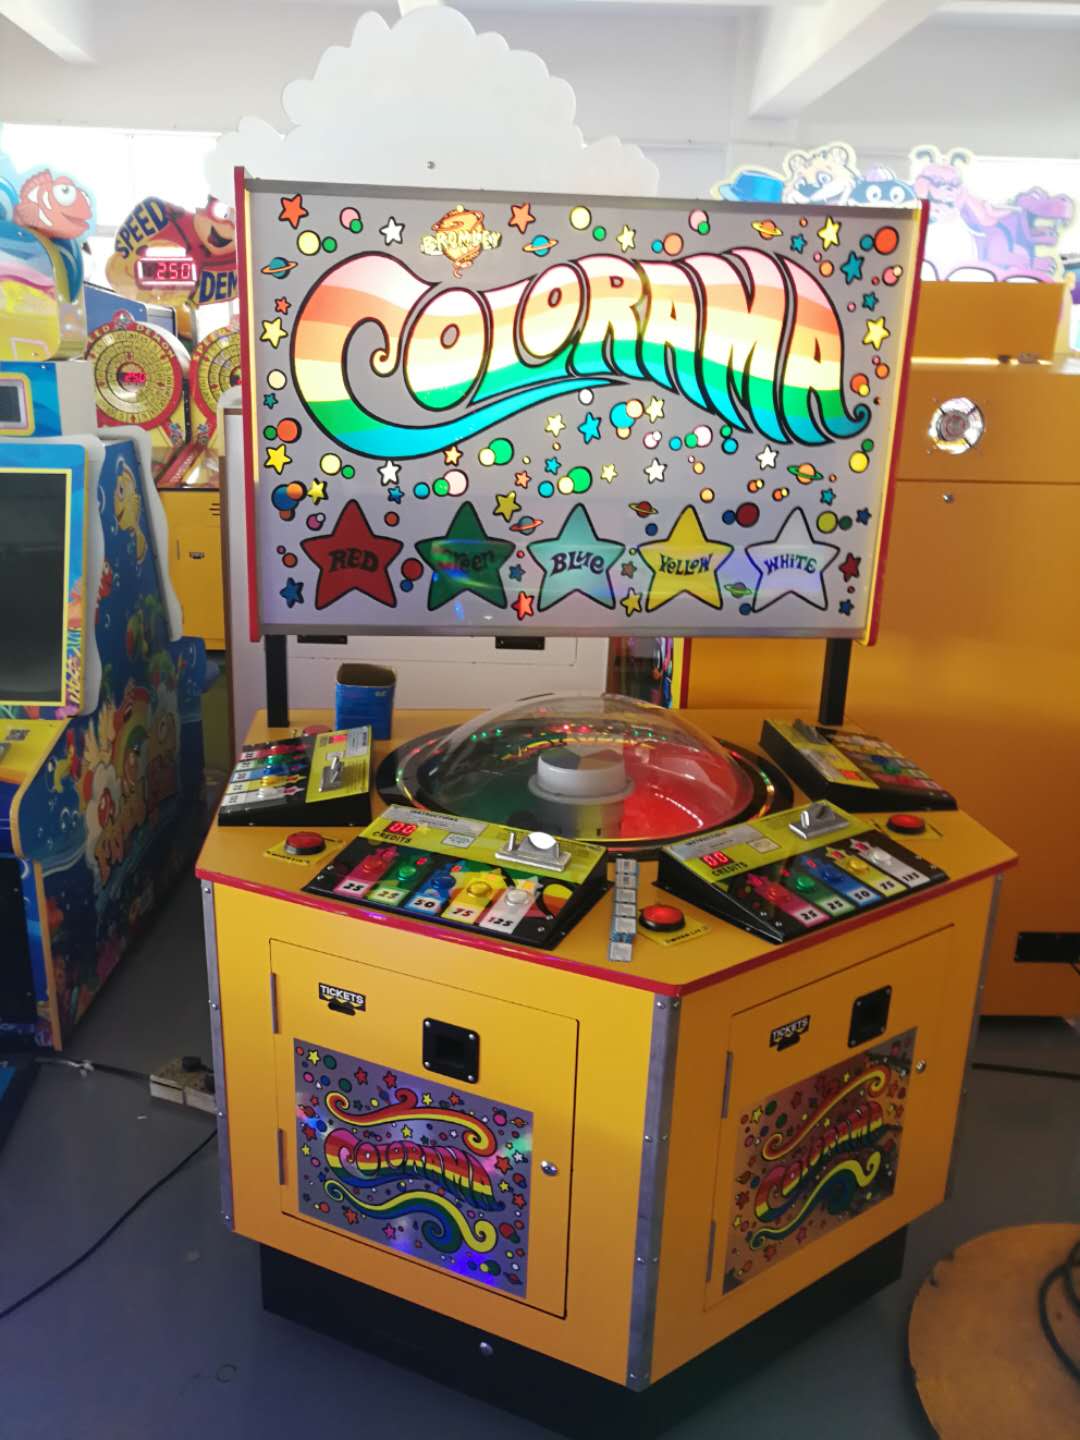 Colorama-Lottery-Redemption-game-machine-Tomy-Arcade-workshop-process